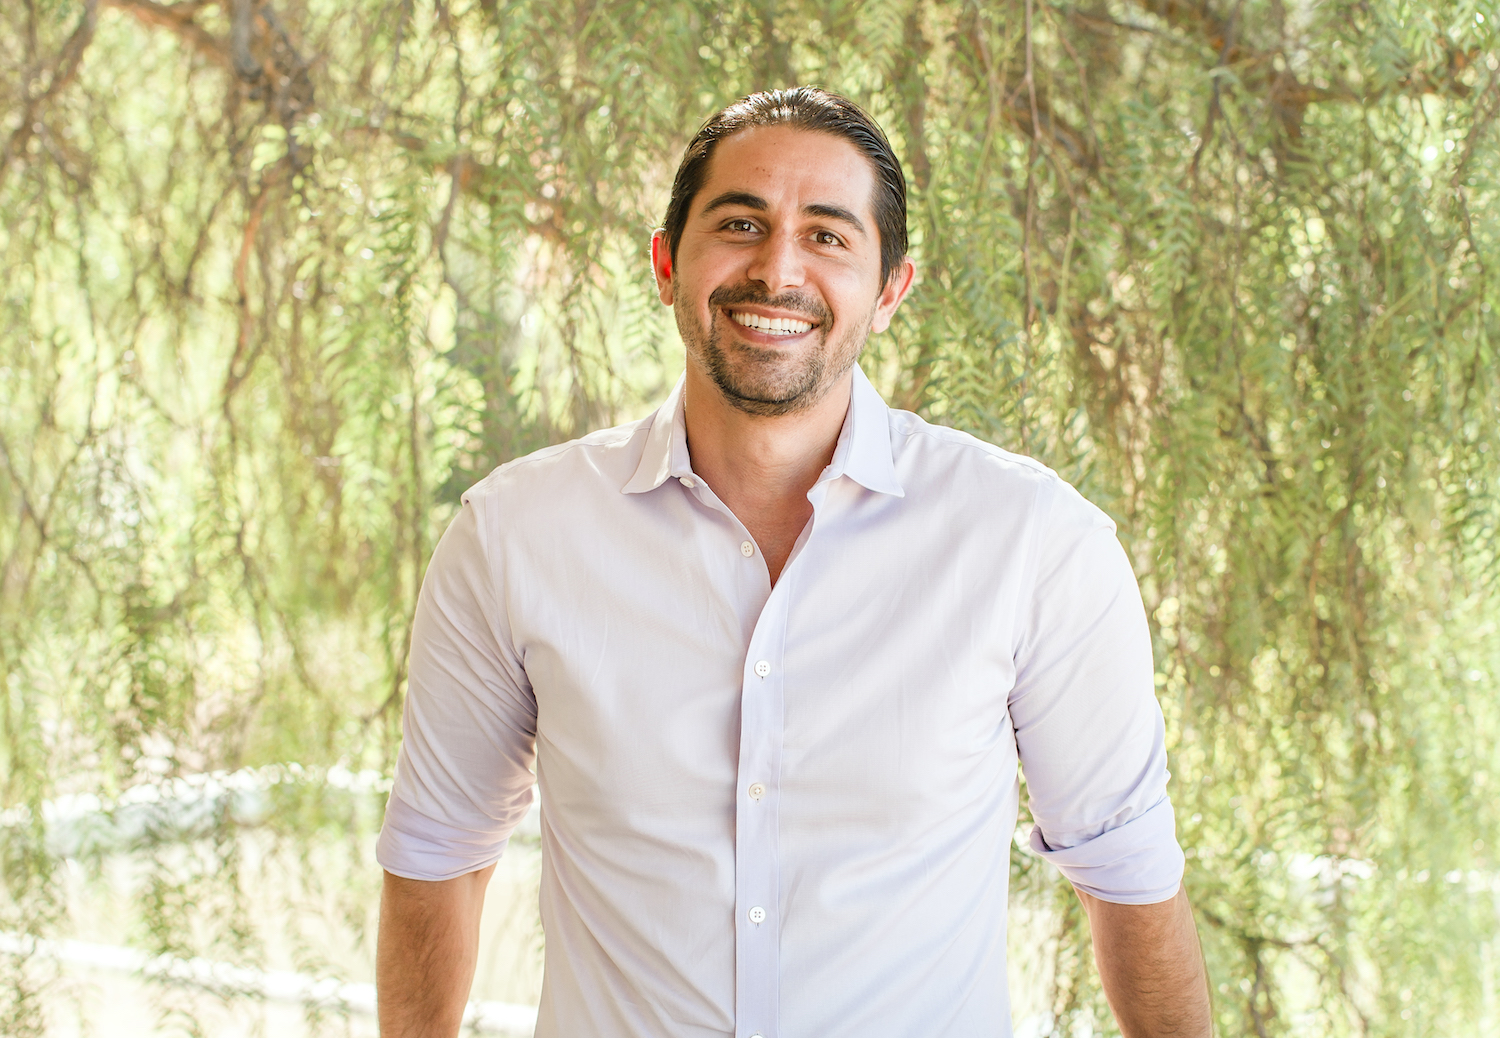 Omid Sabet, founder of The Positive Movement Foundation serving schools in need across San Diego